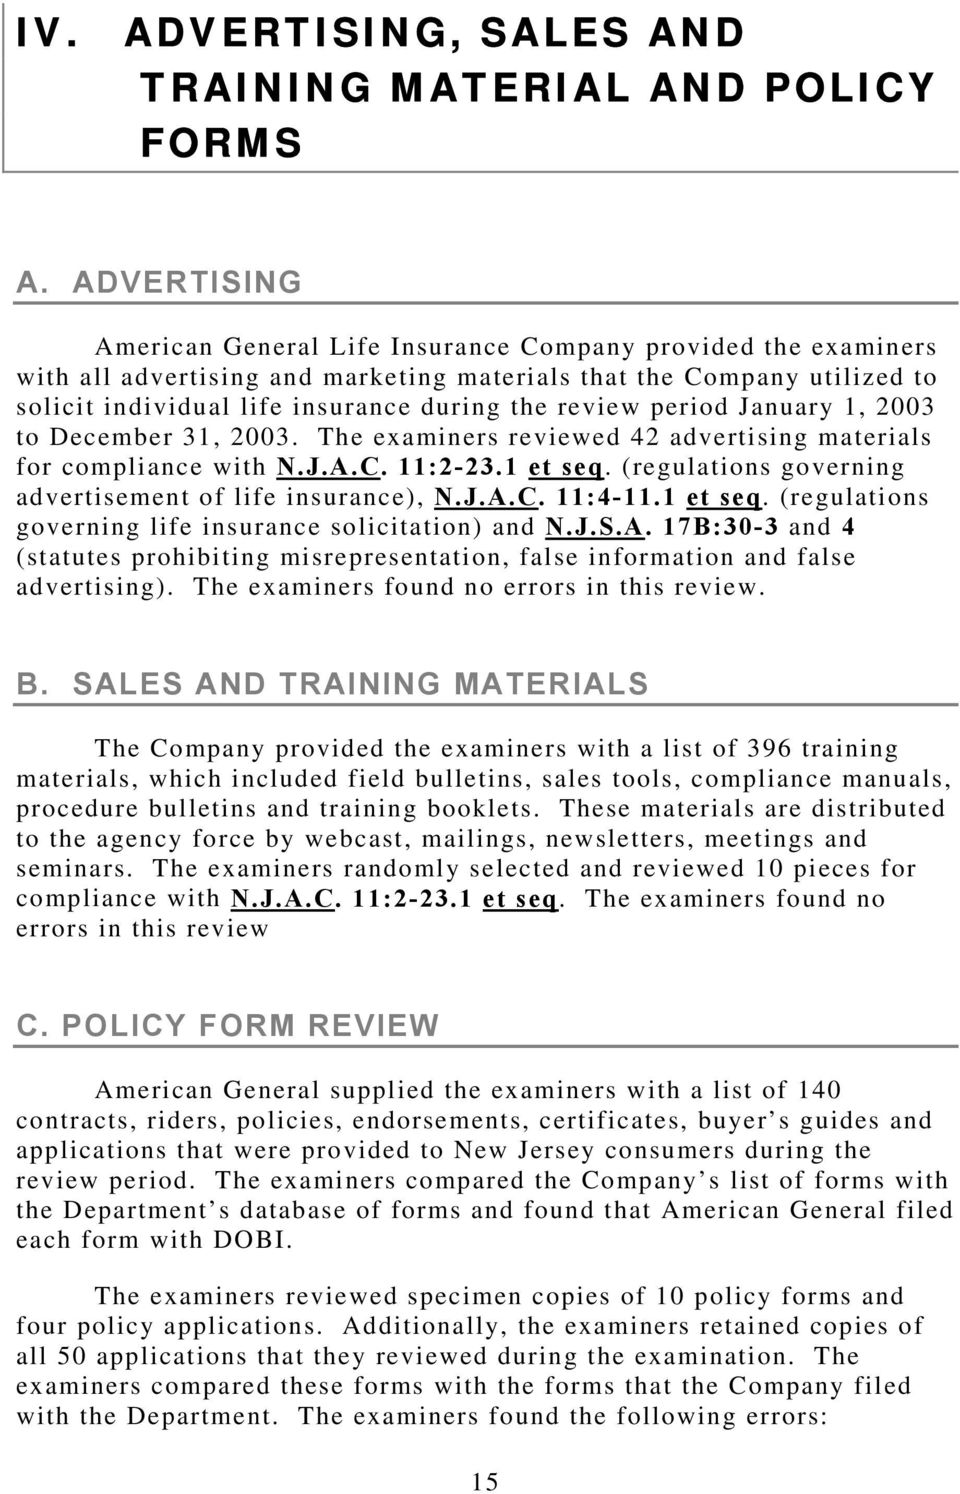 review period January 1, 2003 to December 31, 2003. The examiners reviewed 42 advertising materials for compliance with N.J.A.C. 11:2-23.1 et seq.